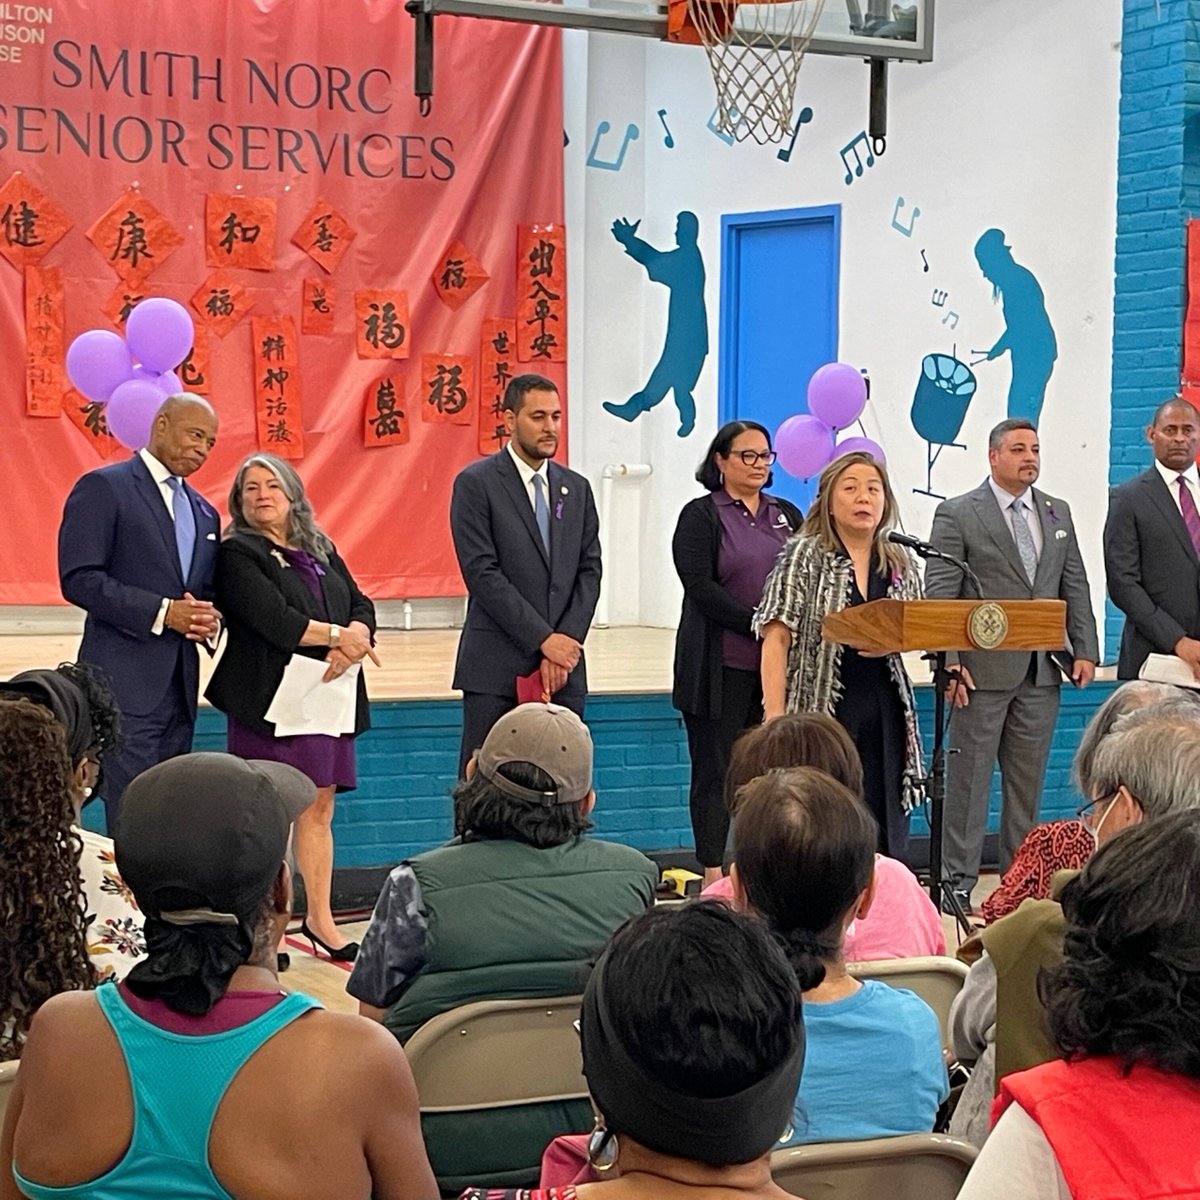 On 6/15, HMH was honored to host a press conference with @NYCAging, @NYCMayor & @NYPDPC. Elder Abuse is a hidden tragedy, and the signs are not always easily recognizable. We're grateful to our city government for prioritizing elder safety. Learn more at aging.ny.gov/programs/elder….